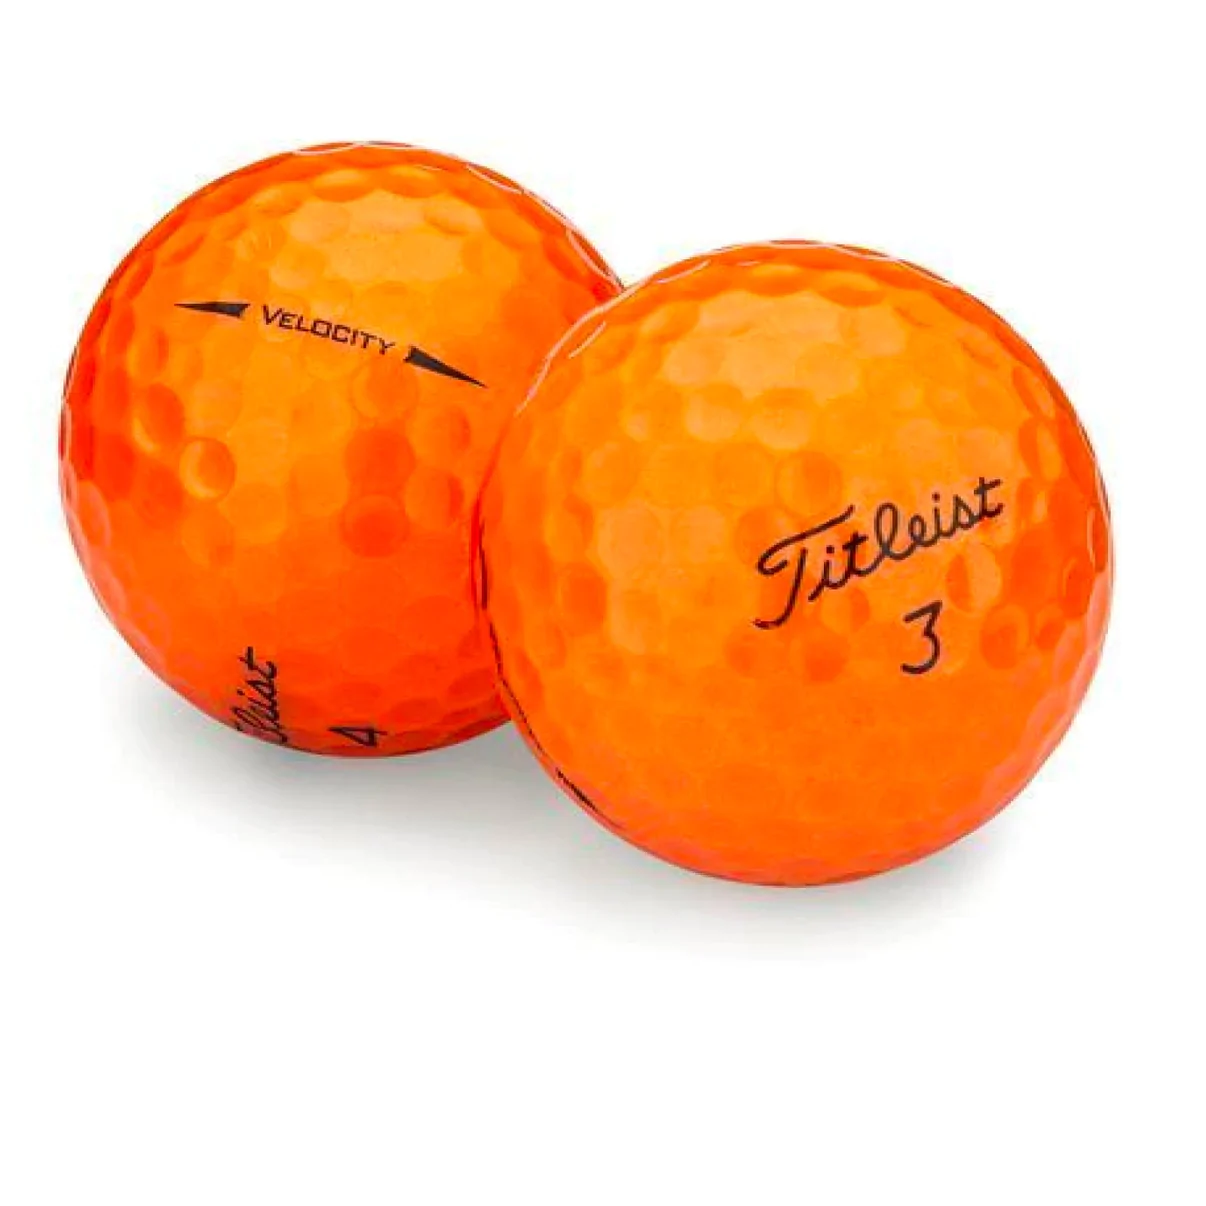 Titleist Velocity orange preowned recycled and used golf balls